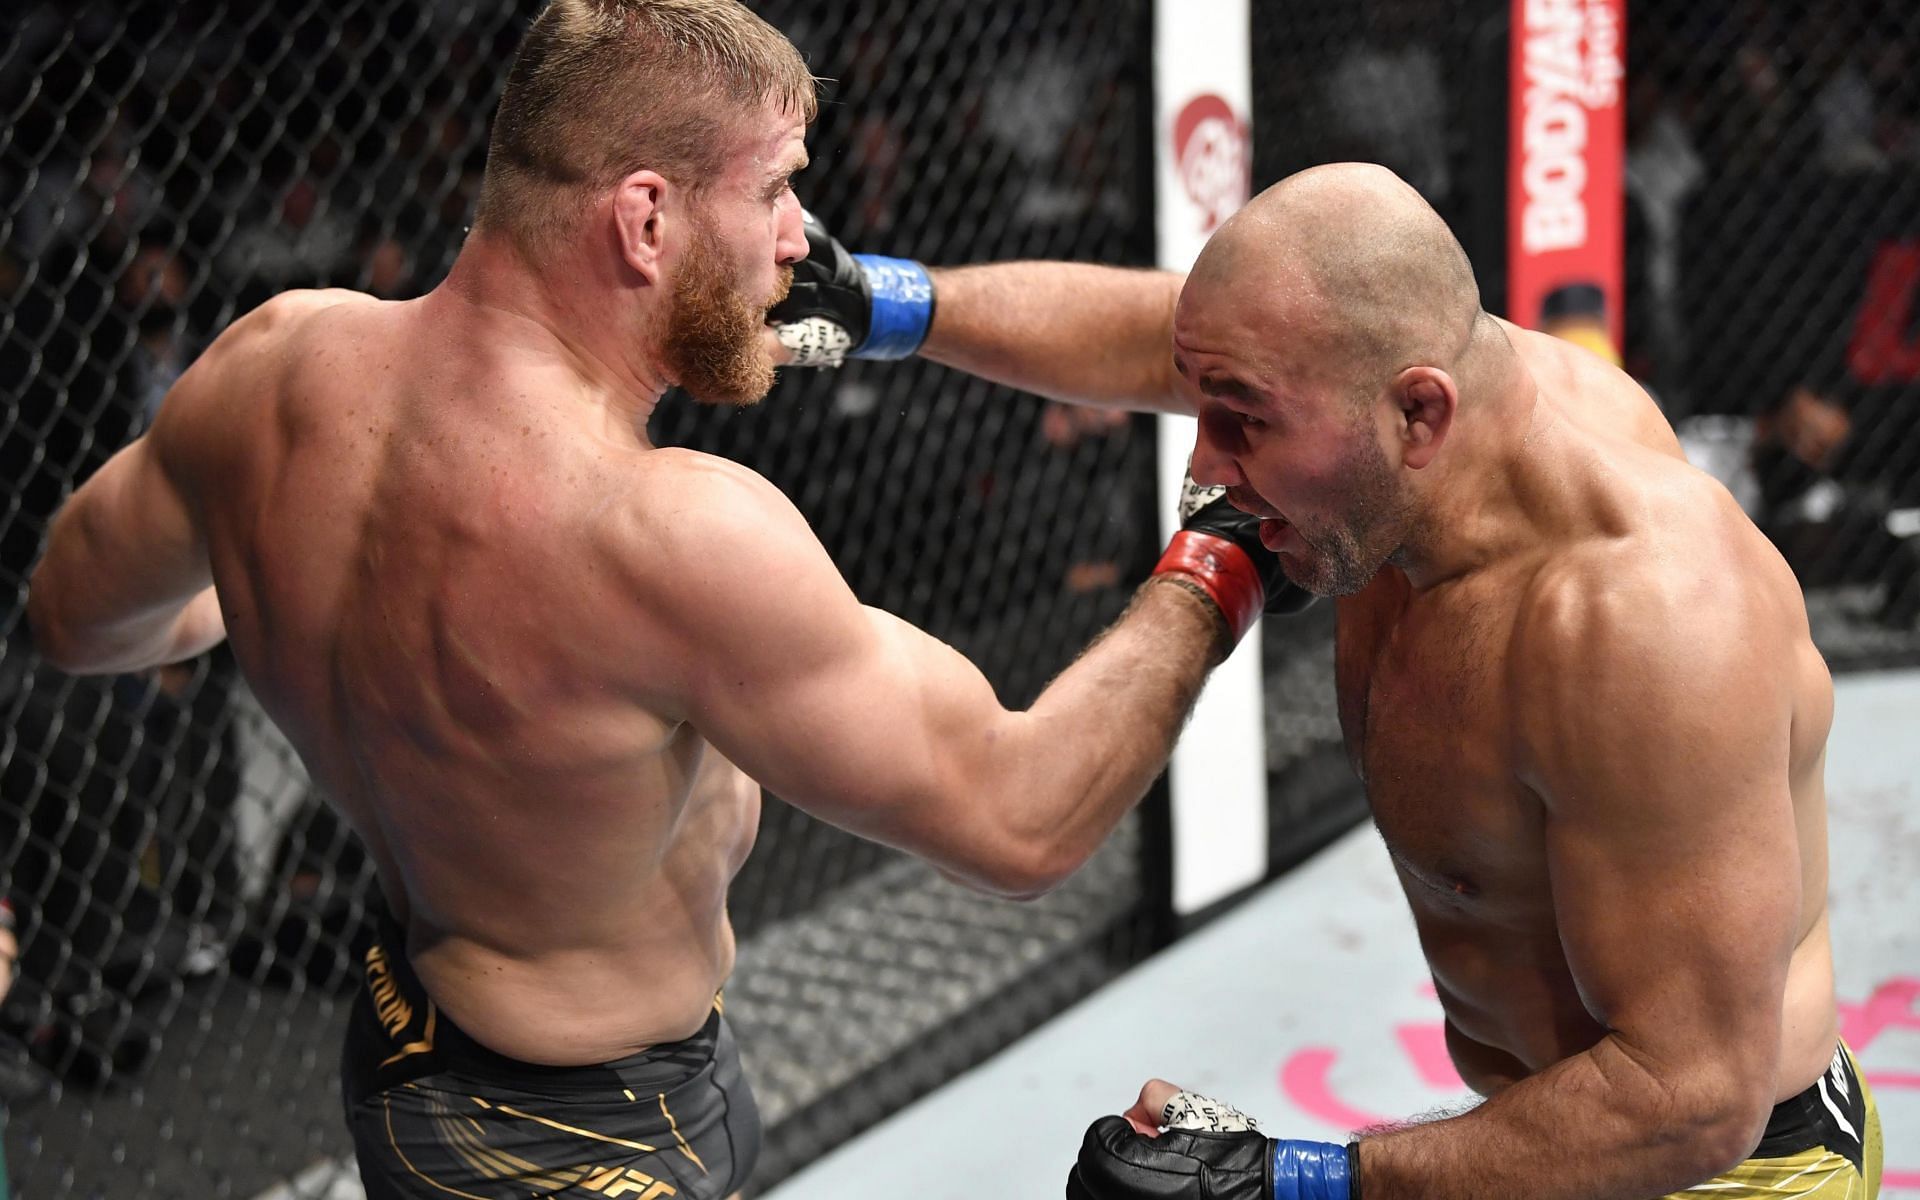 Jan Blachowicz appeared to feel the pressure a little too much in his fight with Glover Teixeira at UFC 267